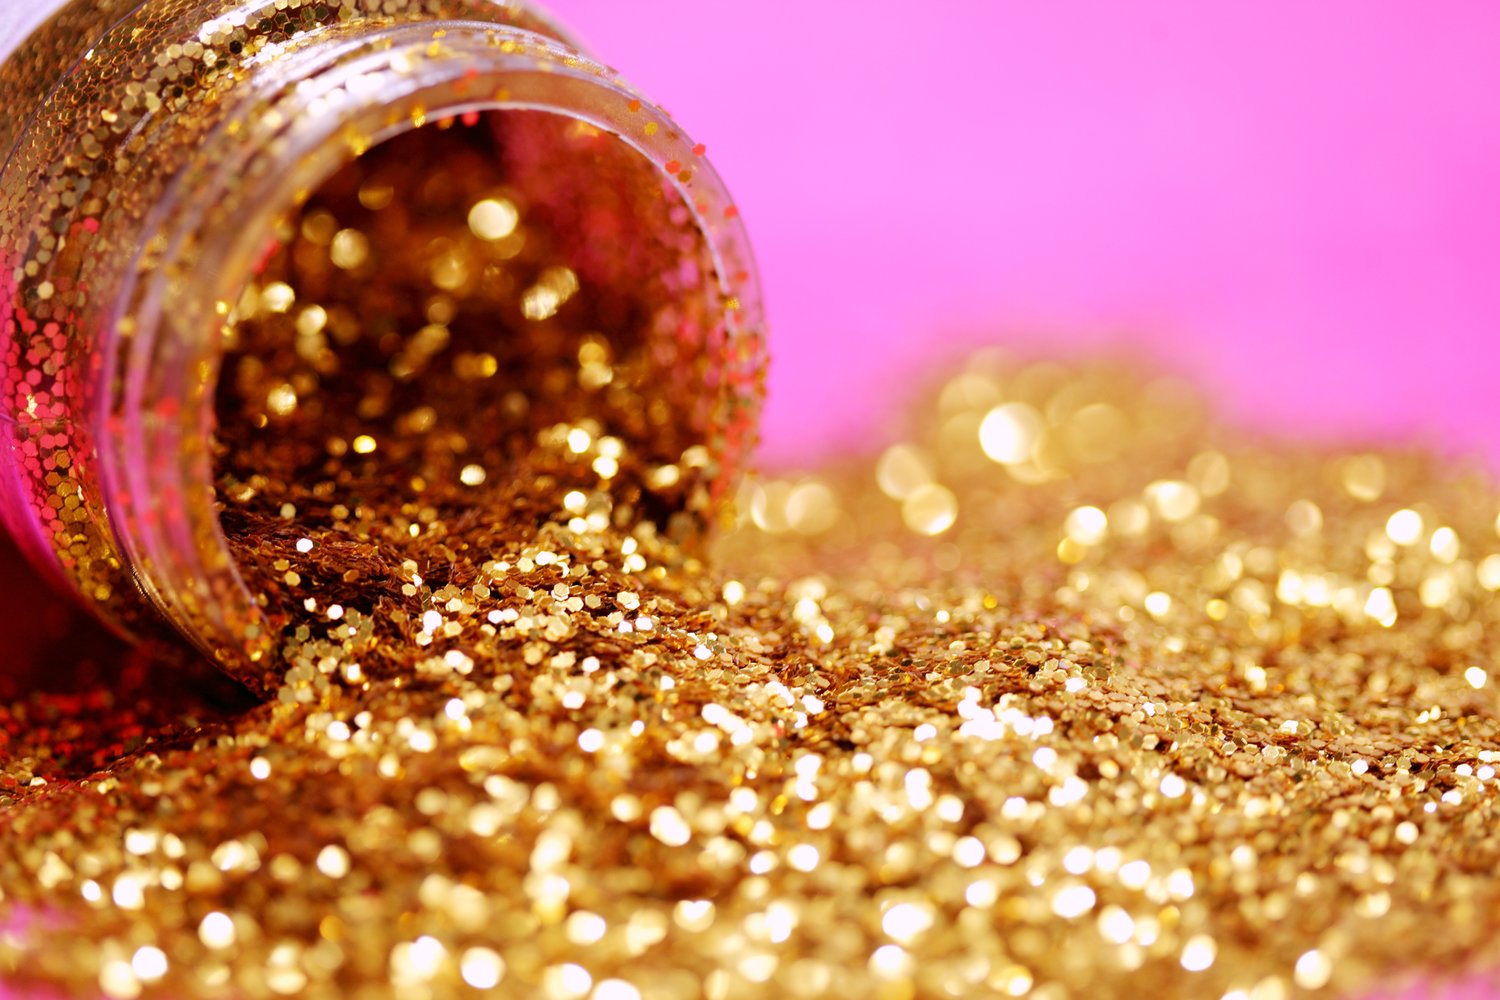 "Modern glitter is usually manufactured from plastic and is rarely recycled, leading to calls from scientists for bans on plastic glitter.”